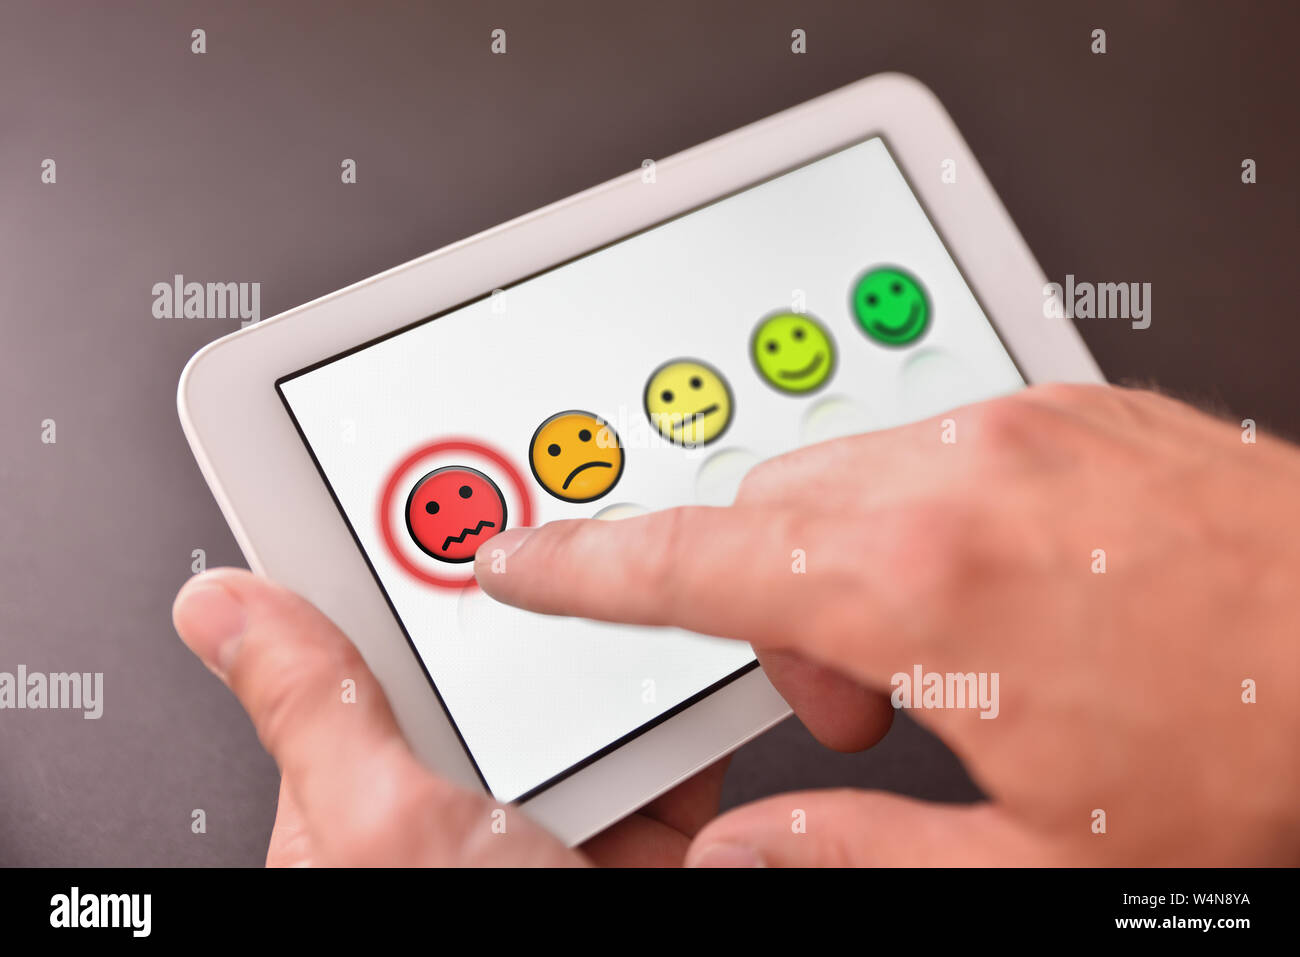 Registering a negative opinion on an electronic device. Horizontal composition. Elevated view. Stock Photo